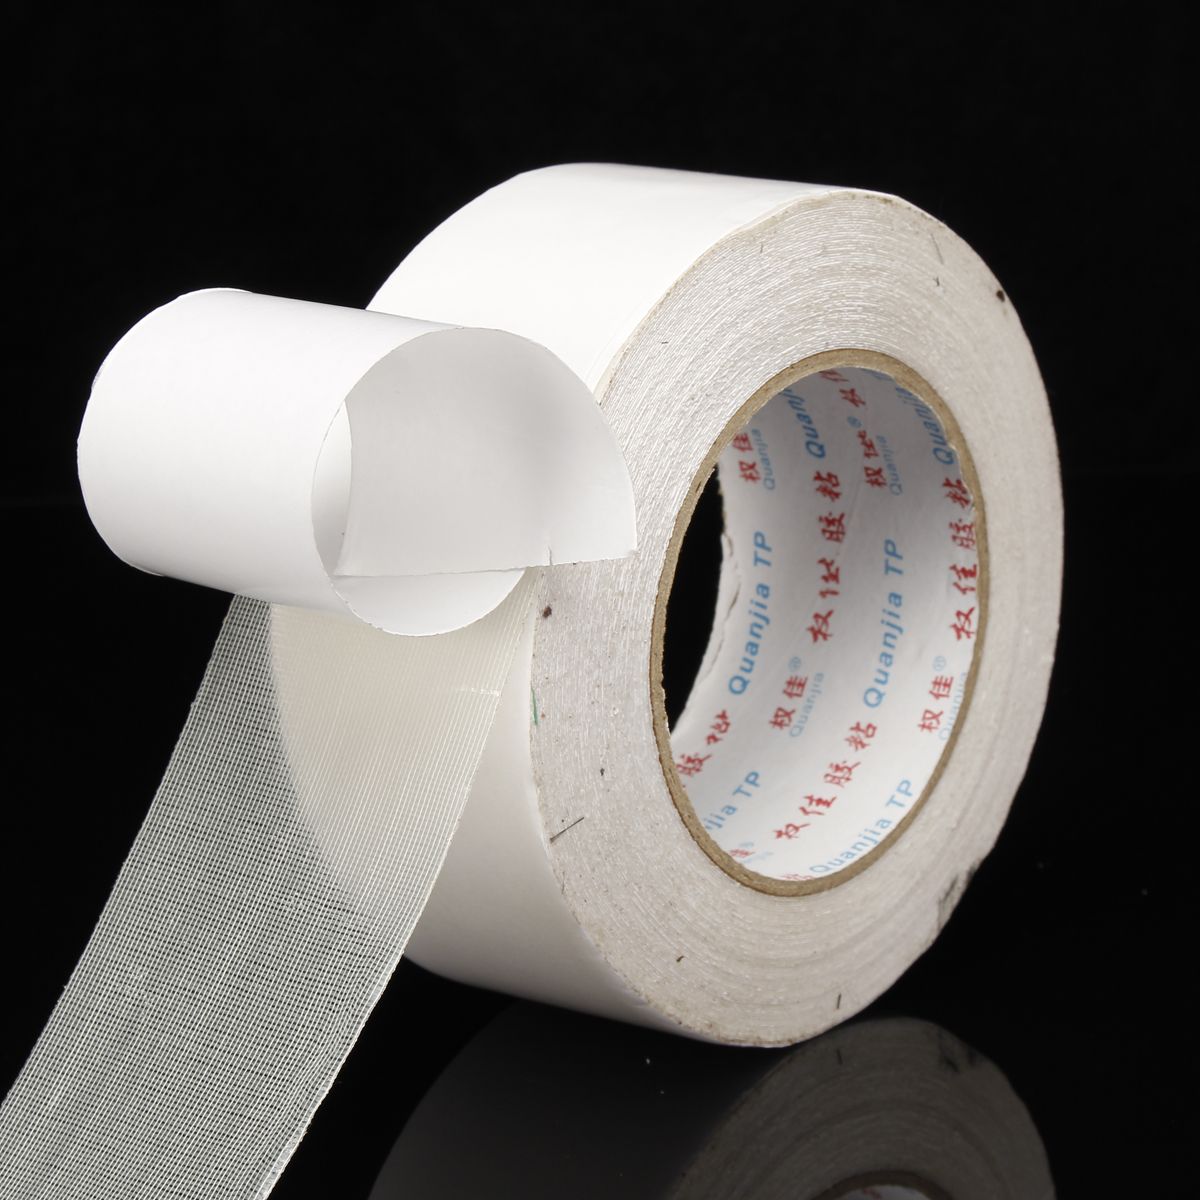 20M-Heavy-Duty-Double-Sided-Tape-Multi-purpose-Strong-Adhesive-Carpet-Tape-10mm20mm30mm40mm50mm-1558528